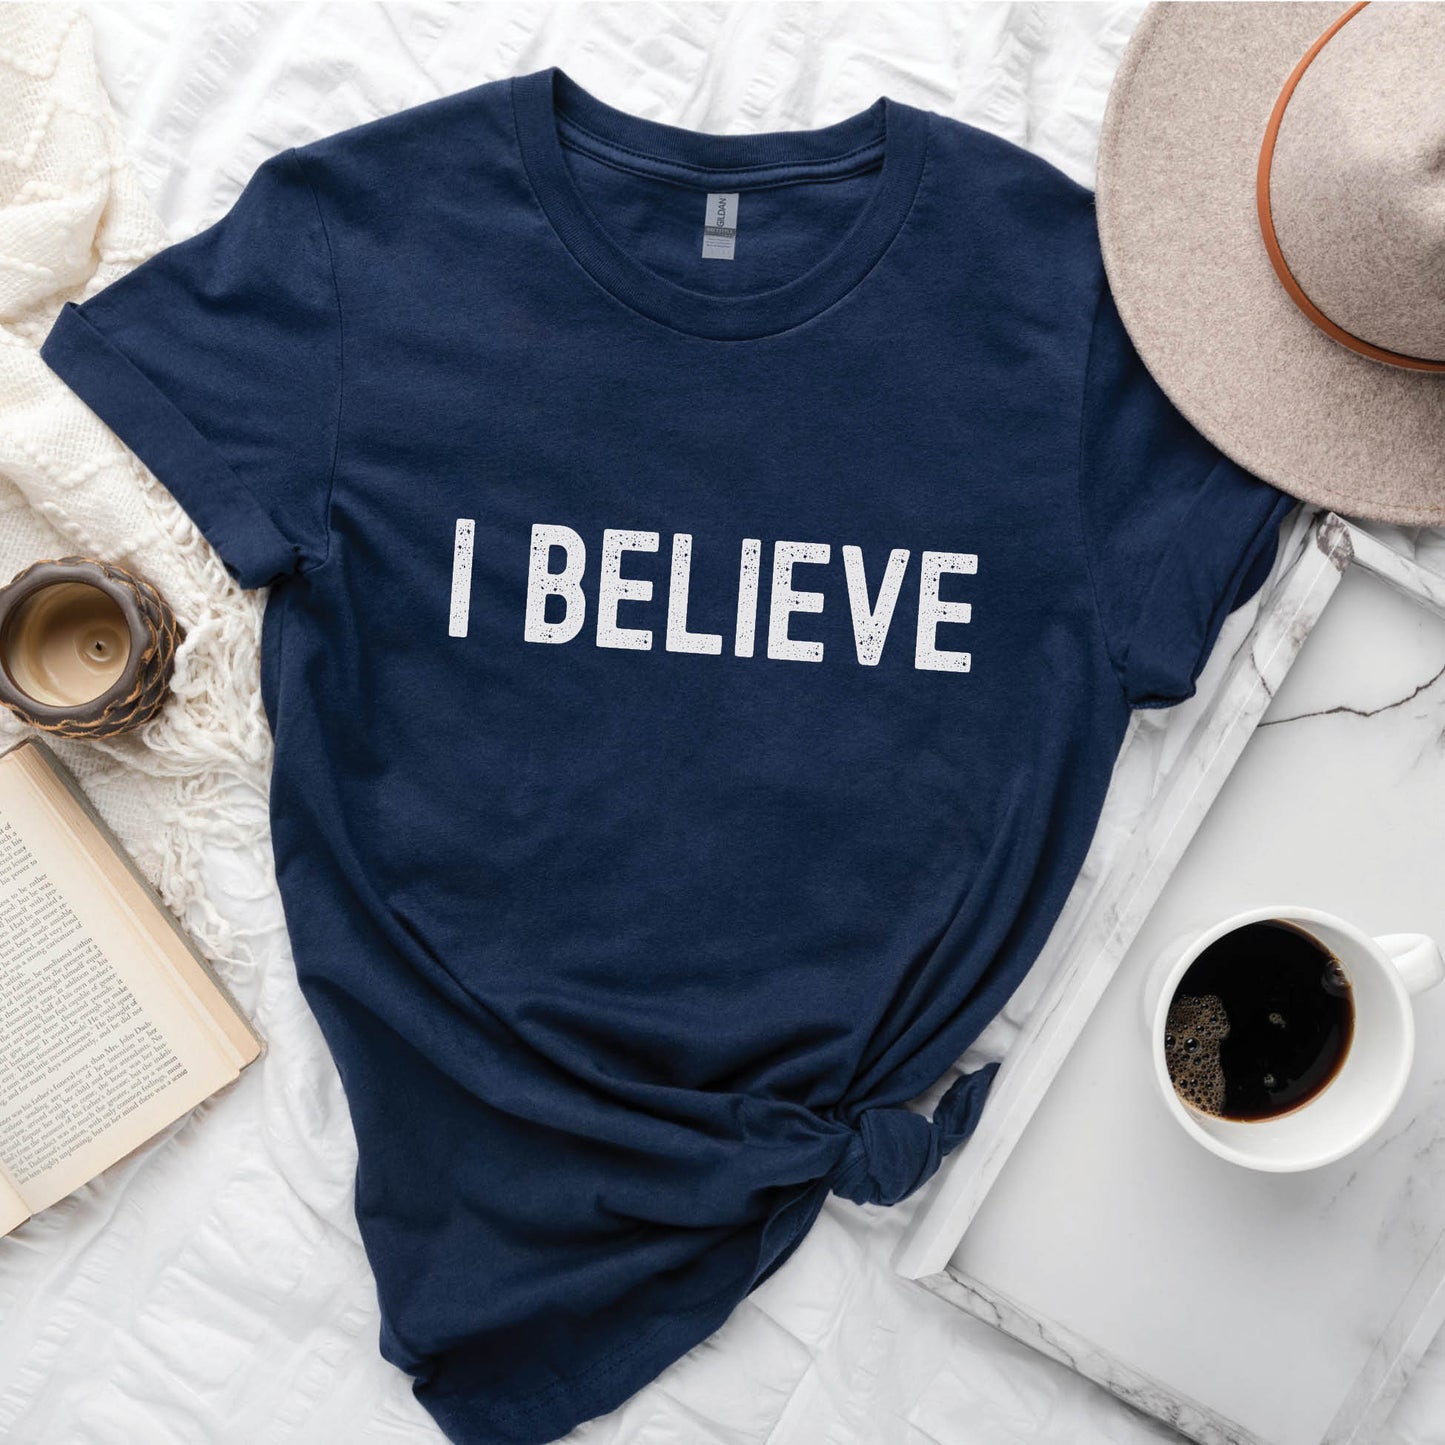 I BELIEVE Christian aesthetic faith-based bold statement distressed typography t-shirt design printed in white on soft navy blue unisex fit t-shirt, designed for men & women believers